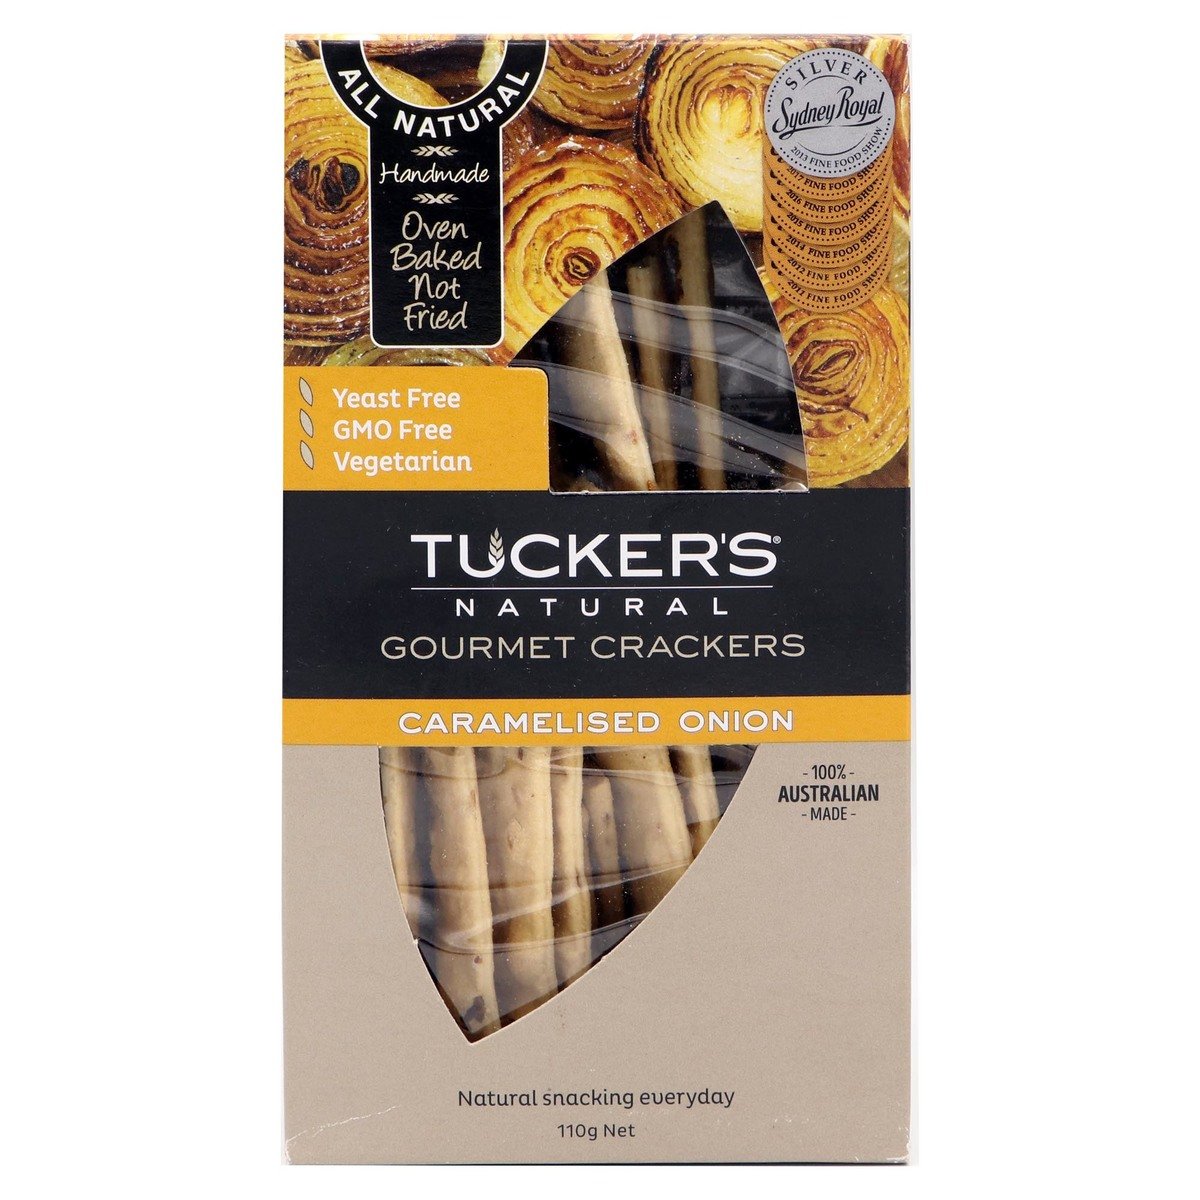 Tucker's Natural Gourmet Crackers Caramelised Onion 110g